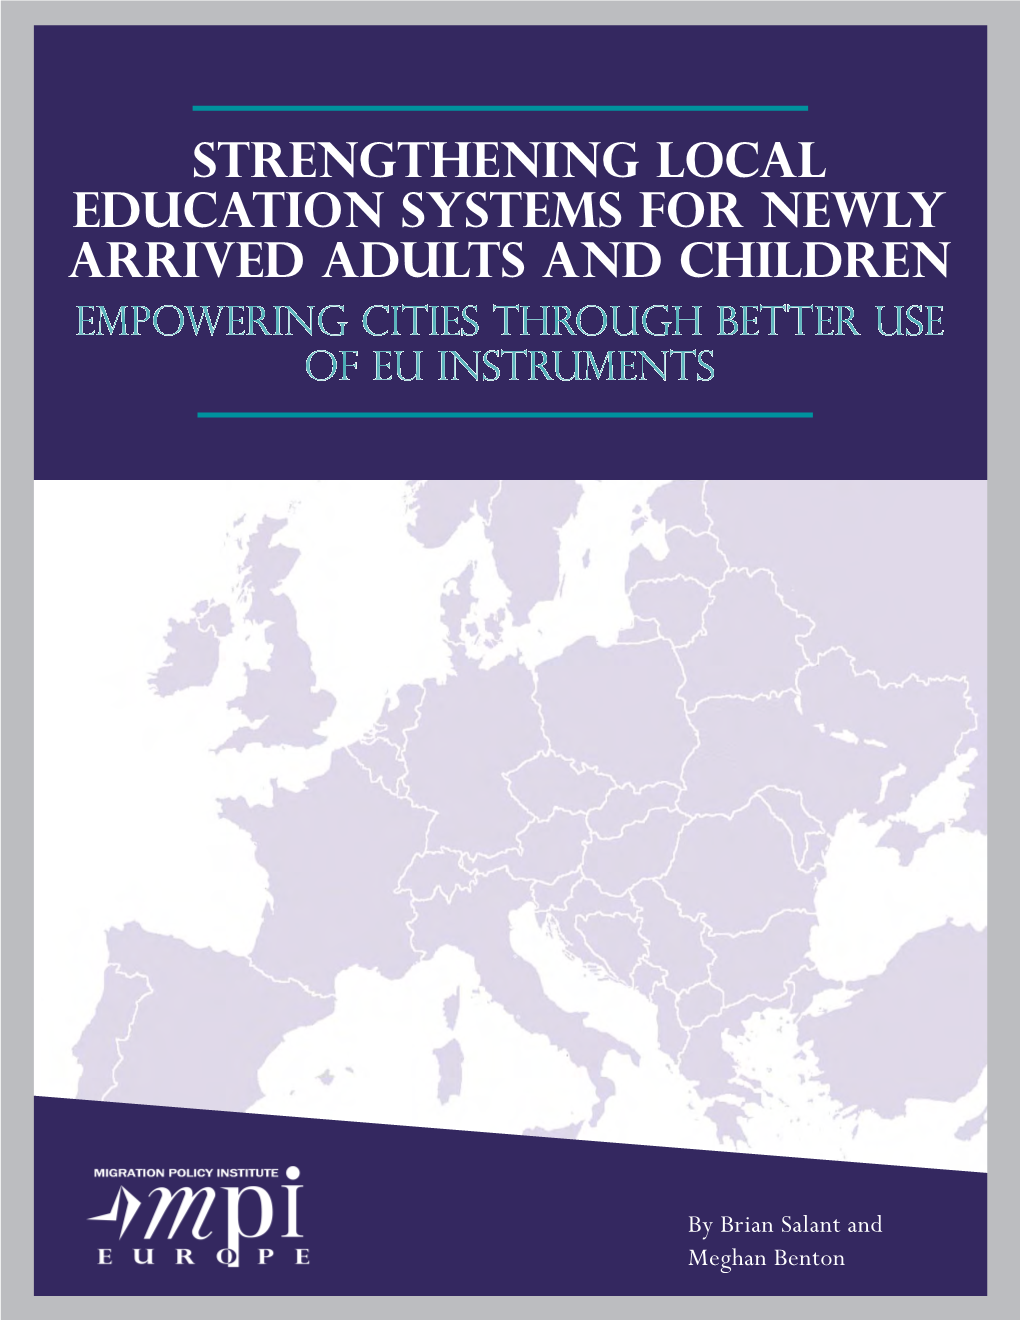 Strengthening Local Education Systems for Newly Arrived Adults and Children Empowering Cities Through Better Use of EU Instruments